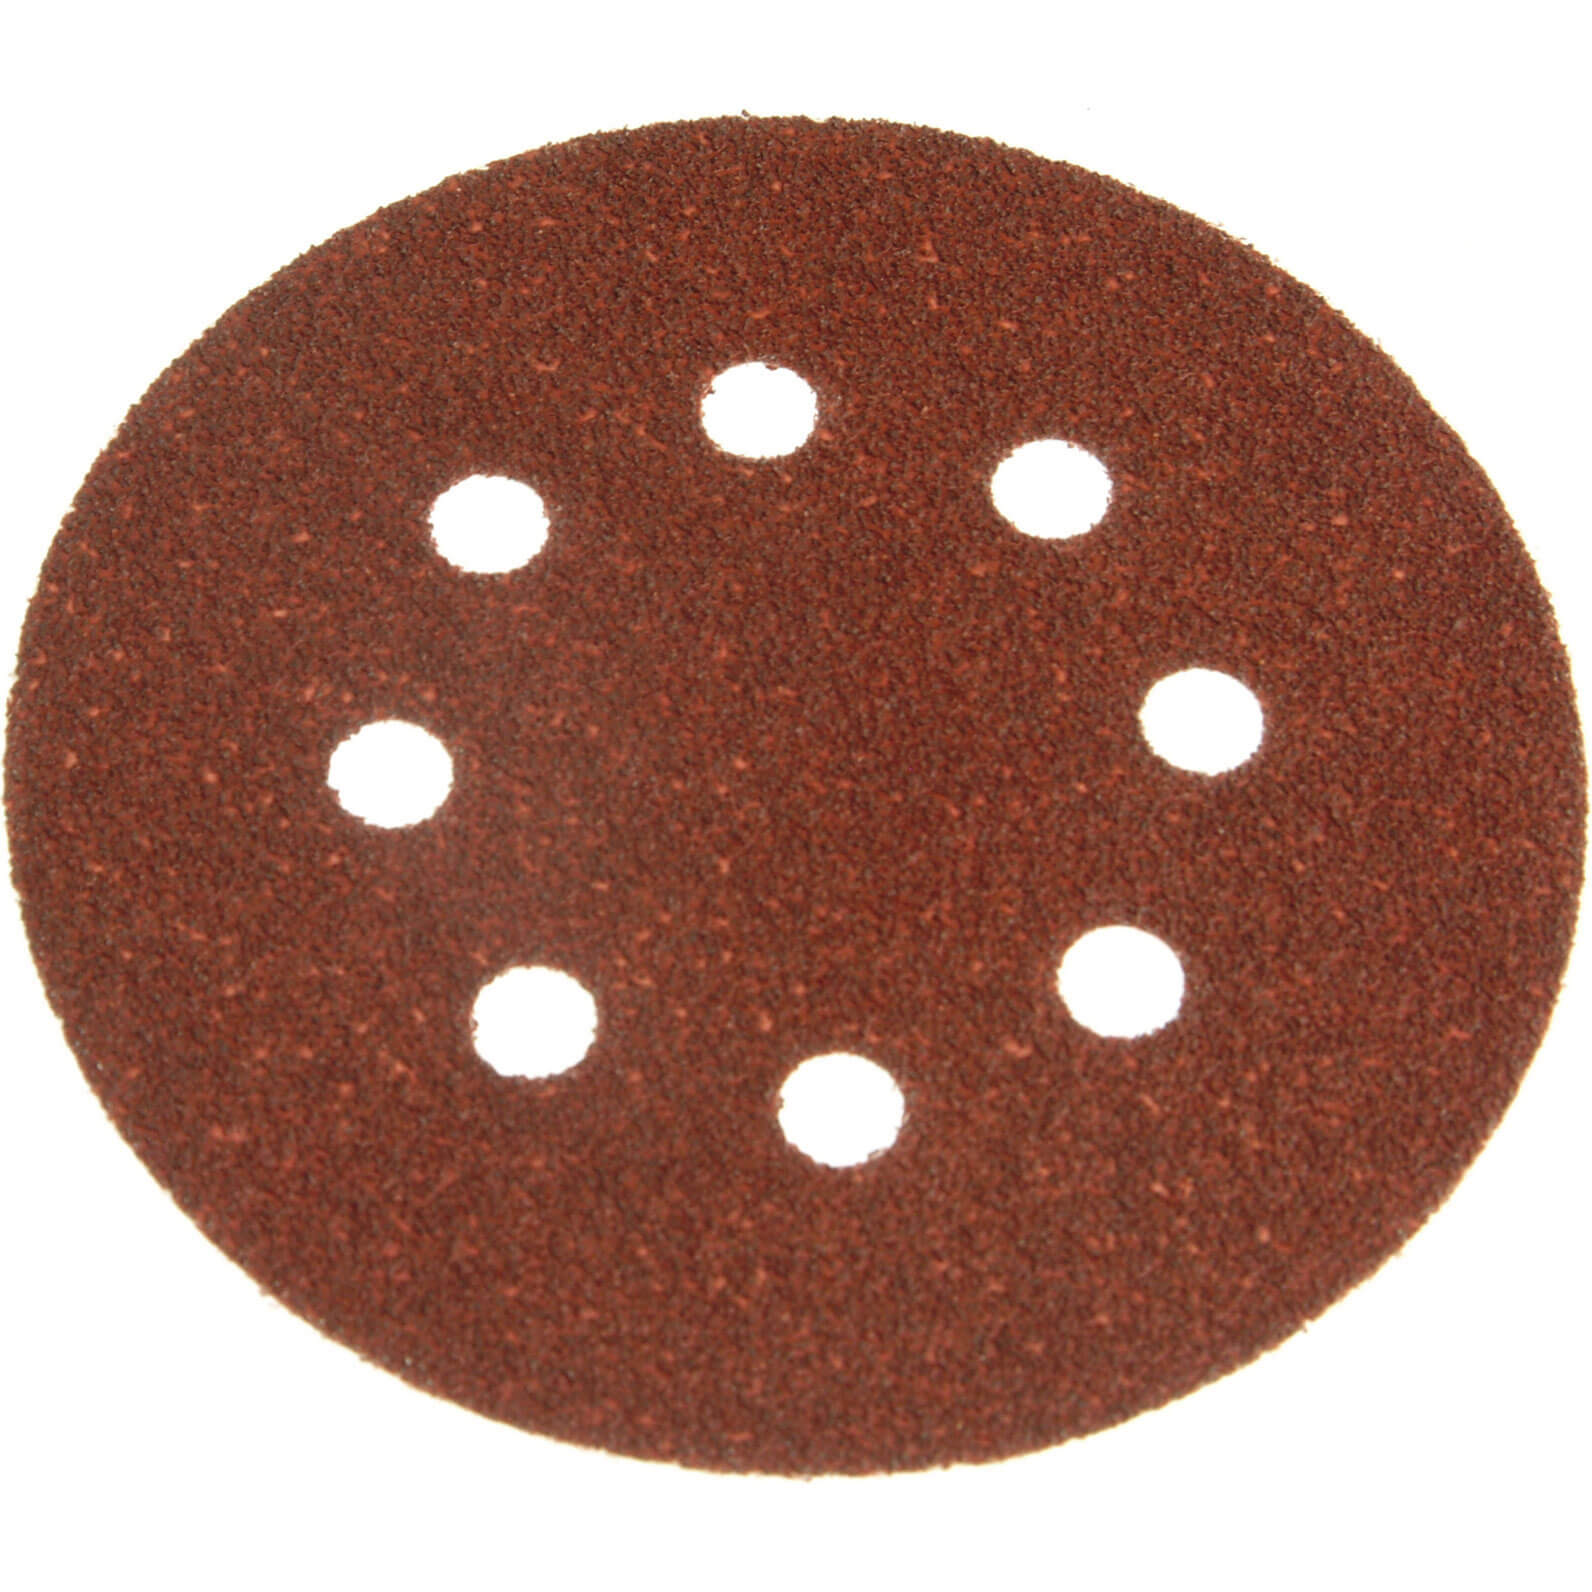 Image of Black and Decker Piranha Quick Fit ROS Sanding Discs 125mm 125mm 240g Pack of 5